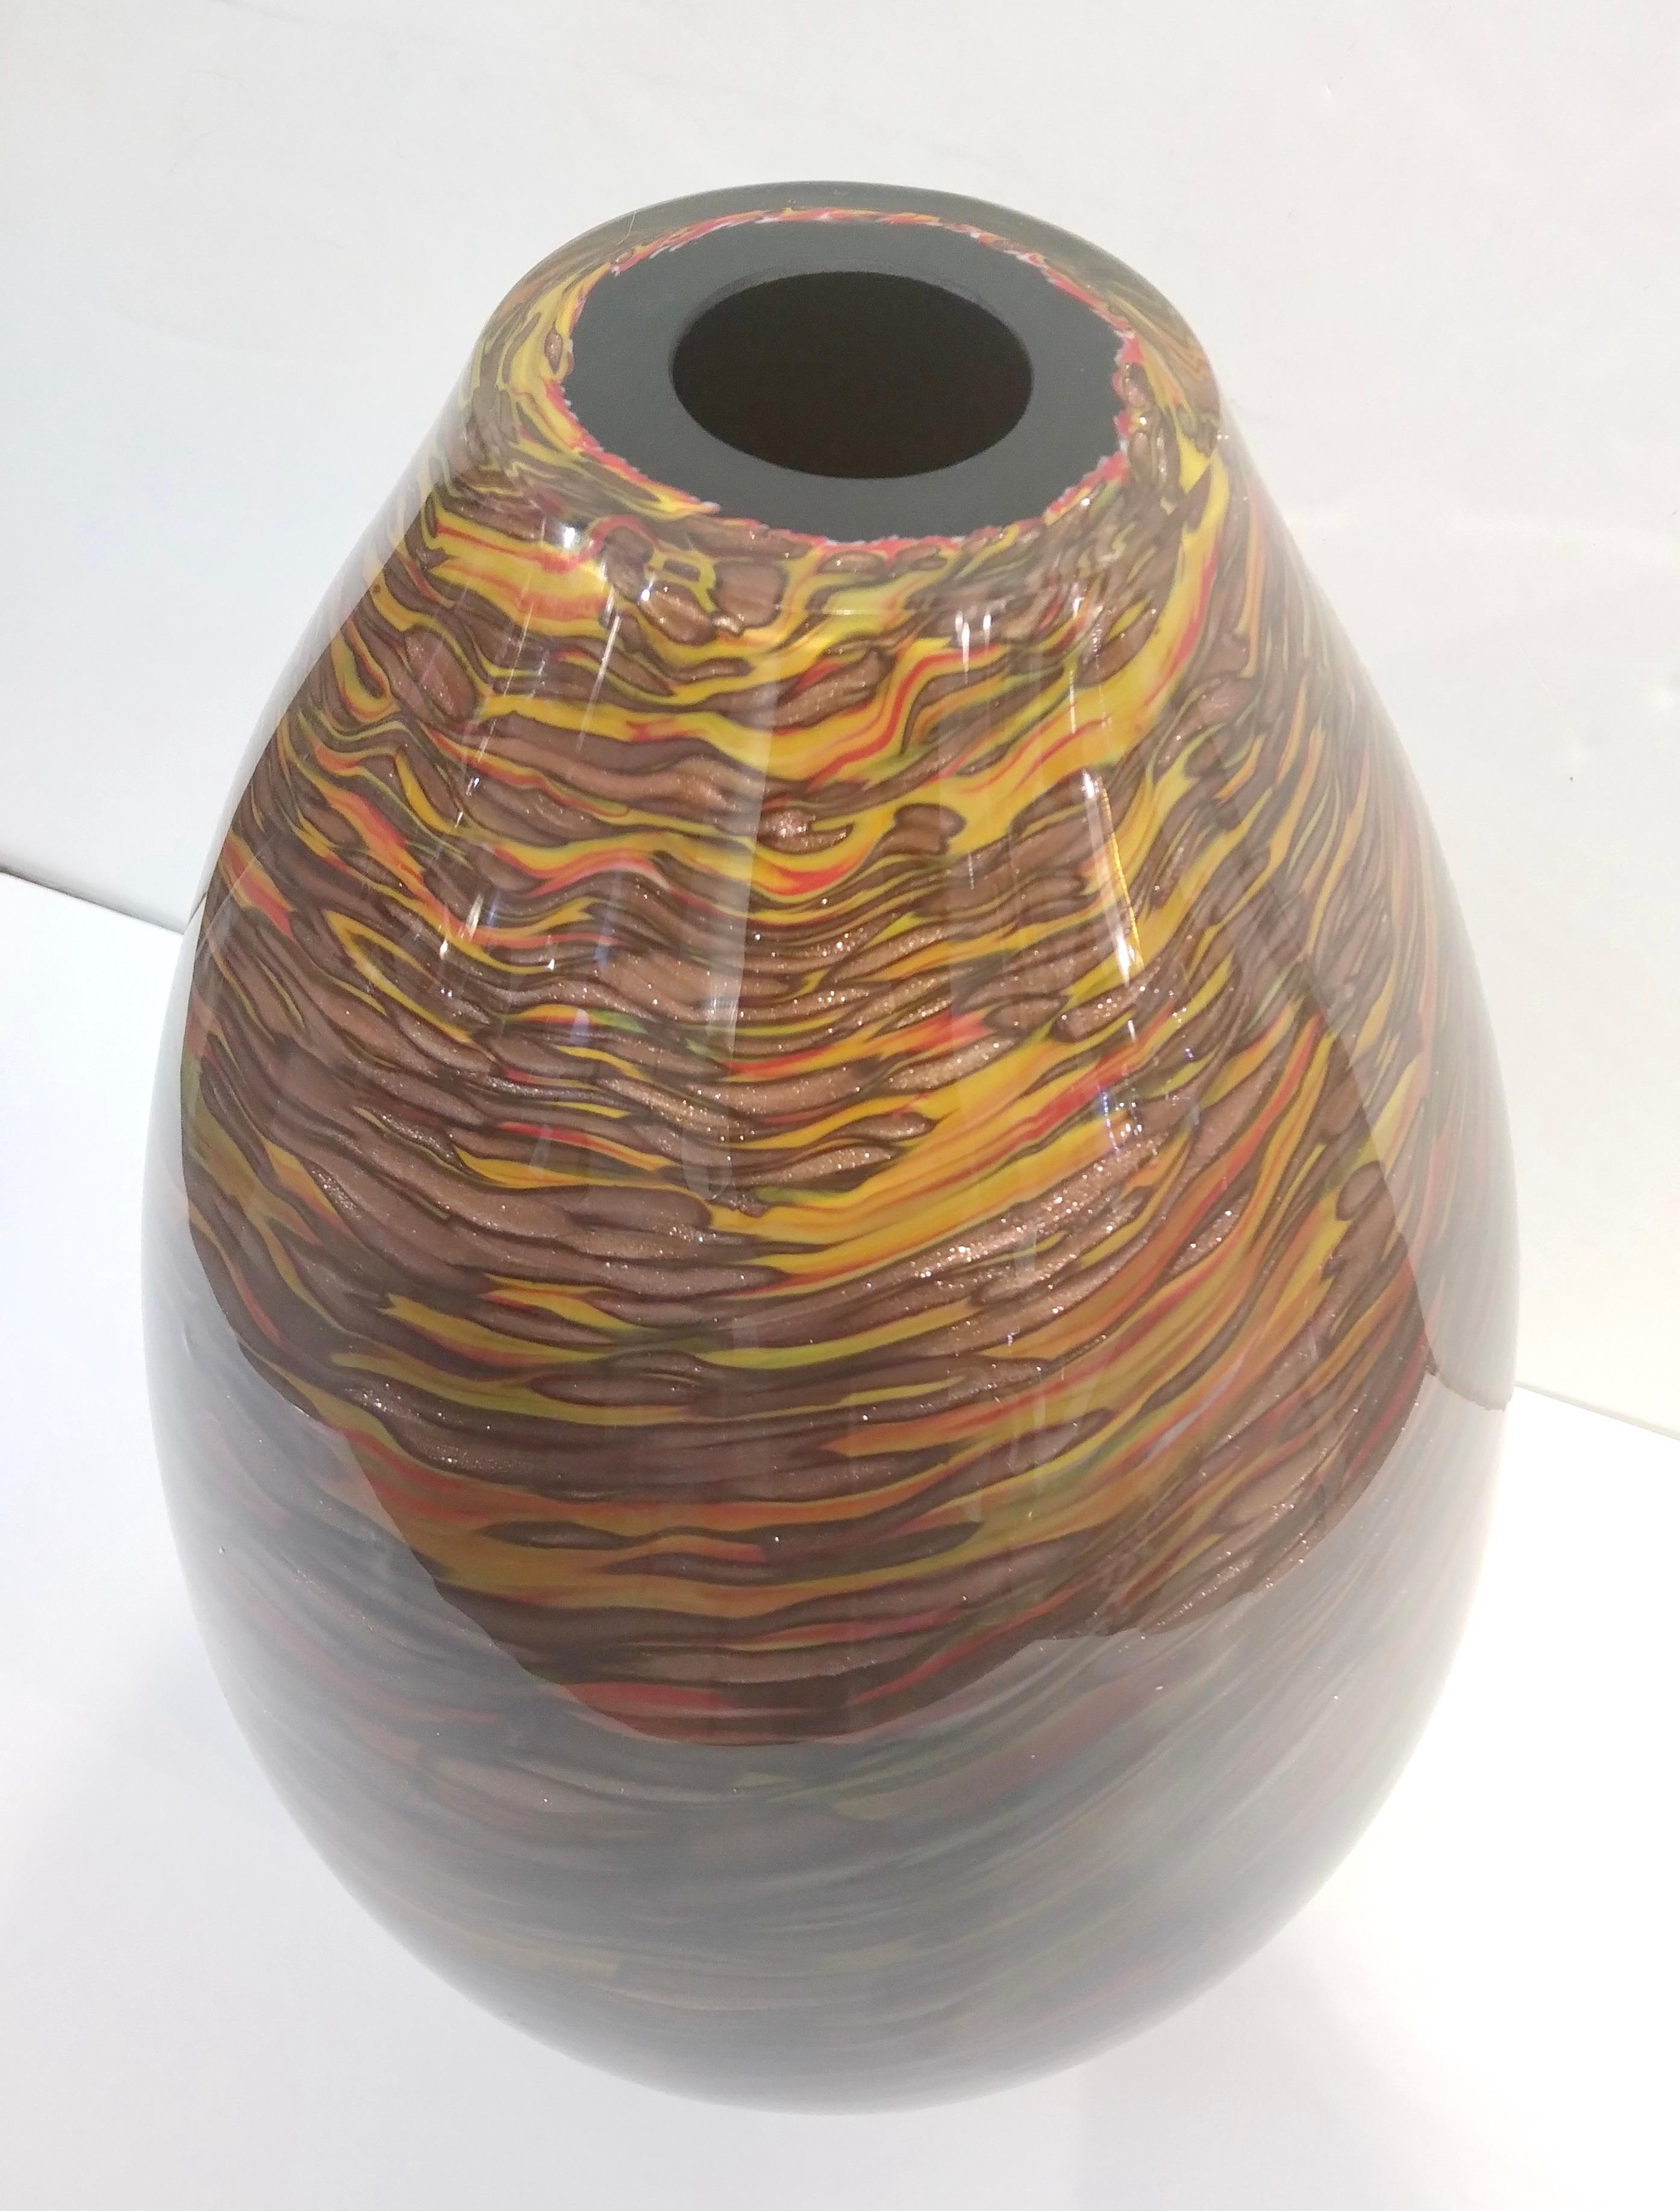 Organic Modern Formia 1980s Modern Ovoid Brown Yellow Red Orange Gold Murano Glass Vase For Sale